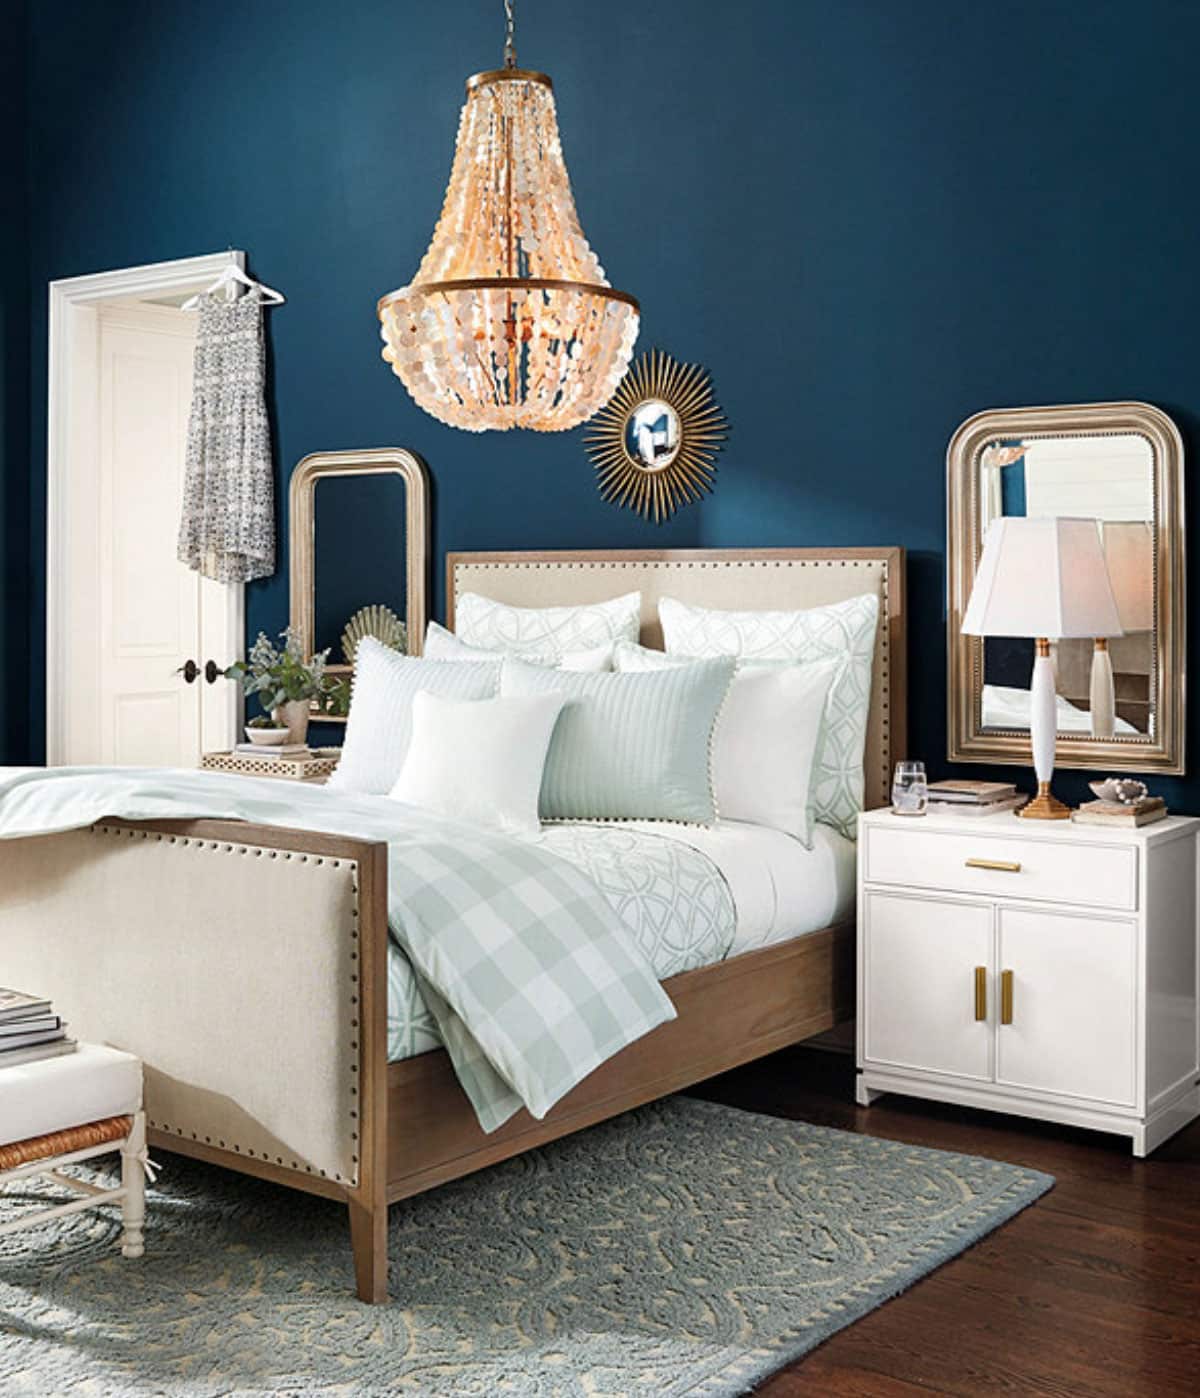 Looking for a way to spruce up your space? These Anthropologie mirror dupes will do the trick. These affordable options are sure to impress.